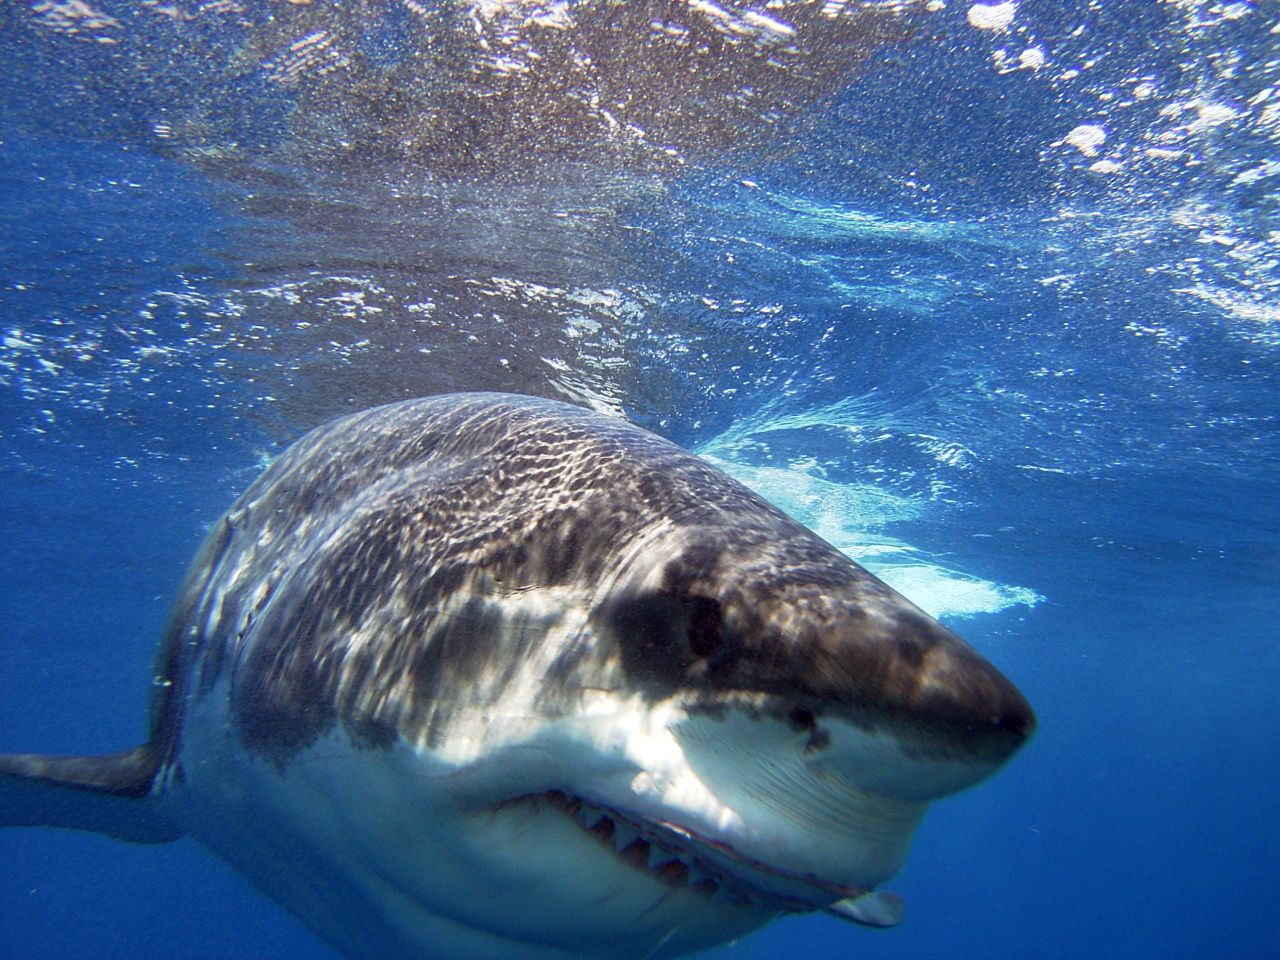 Great White taken by James Bacon at Guadalupe Island Sep 05